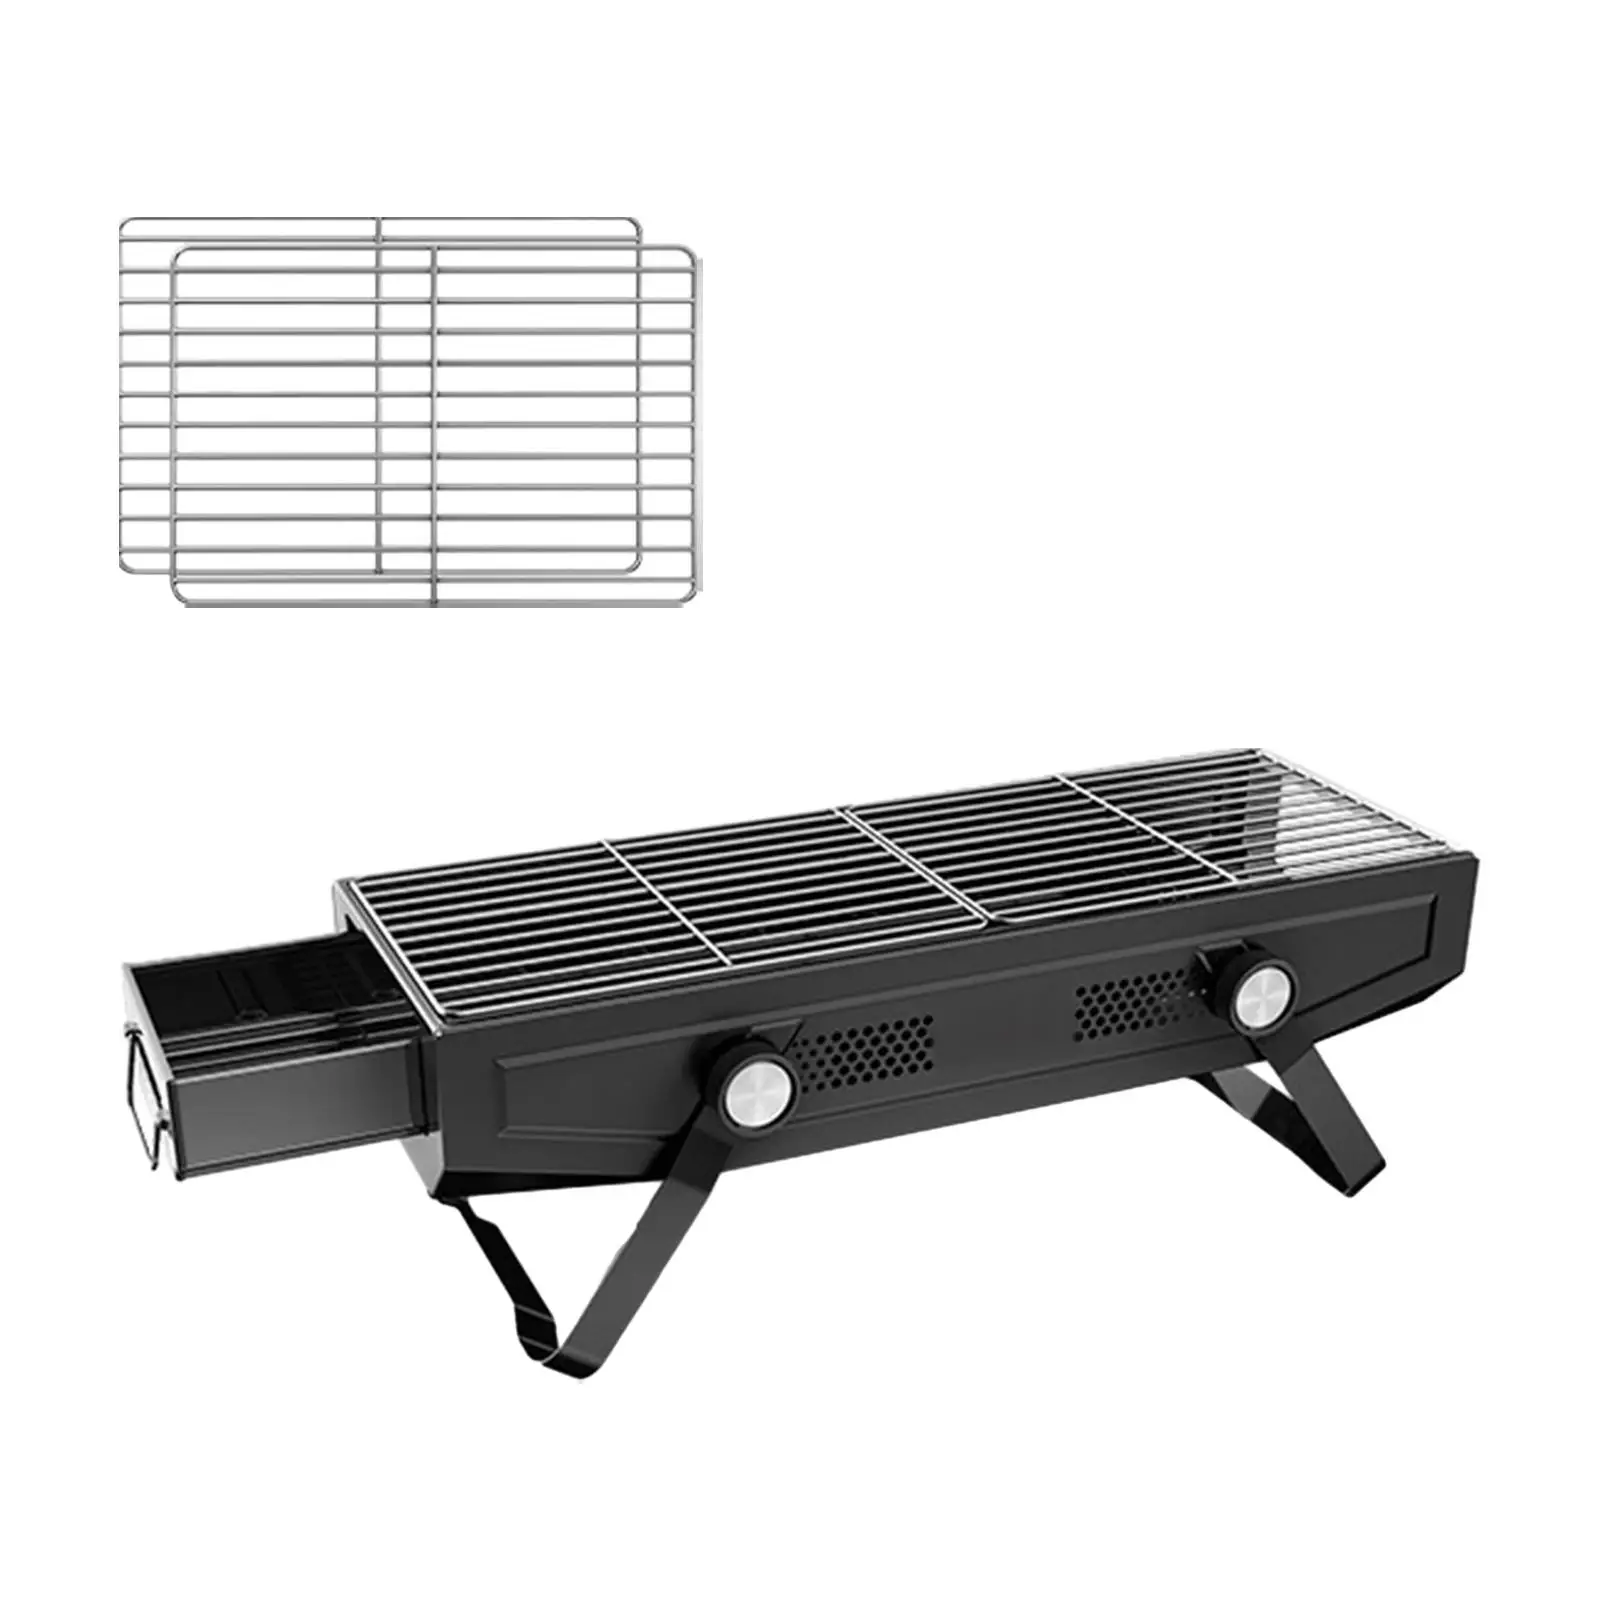 BBQ Grill Charcoal Firewood Burning Grill Camping Barbecue Grill Wood Burning Grills for Picnic Garden Camping Patio Cooking